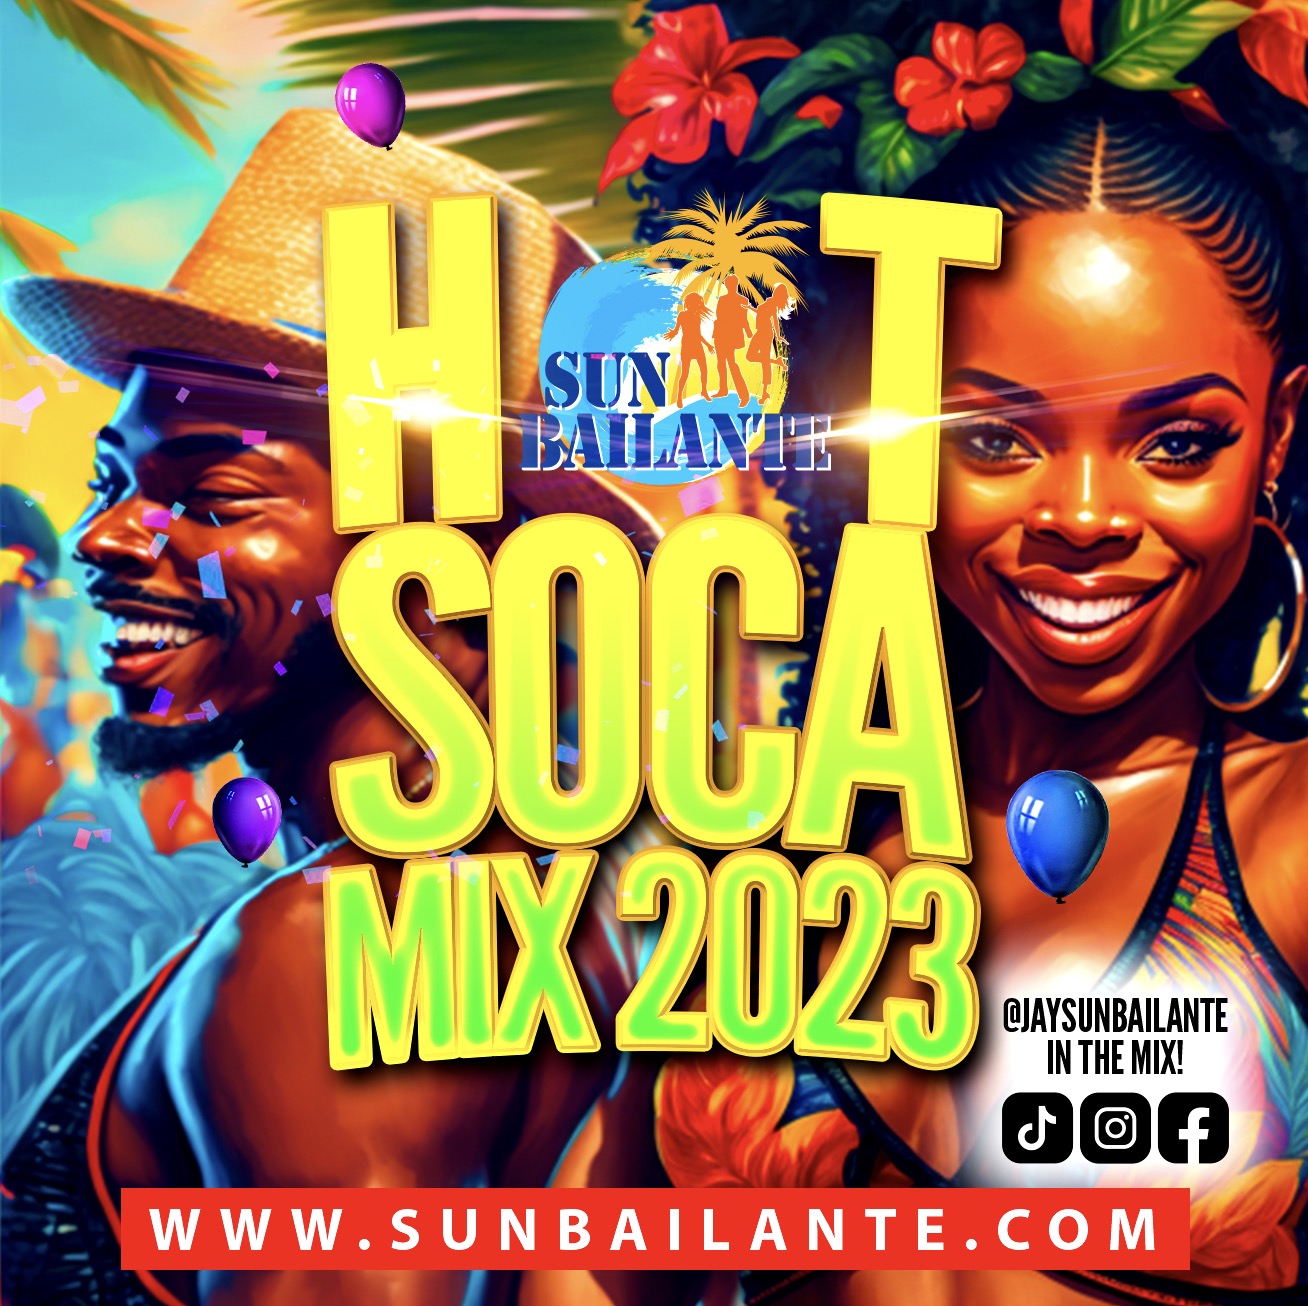 Hot Soca Mix 2023, Trinidad and Tobago, Carnival, Carnaval, Jay Sun Bailante, Mix, best, Power, Groovy, meilleur, music, musique, Caribbean, New